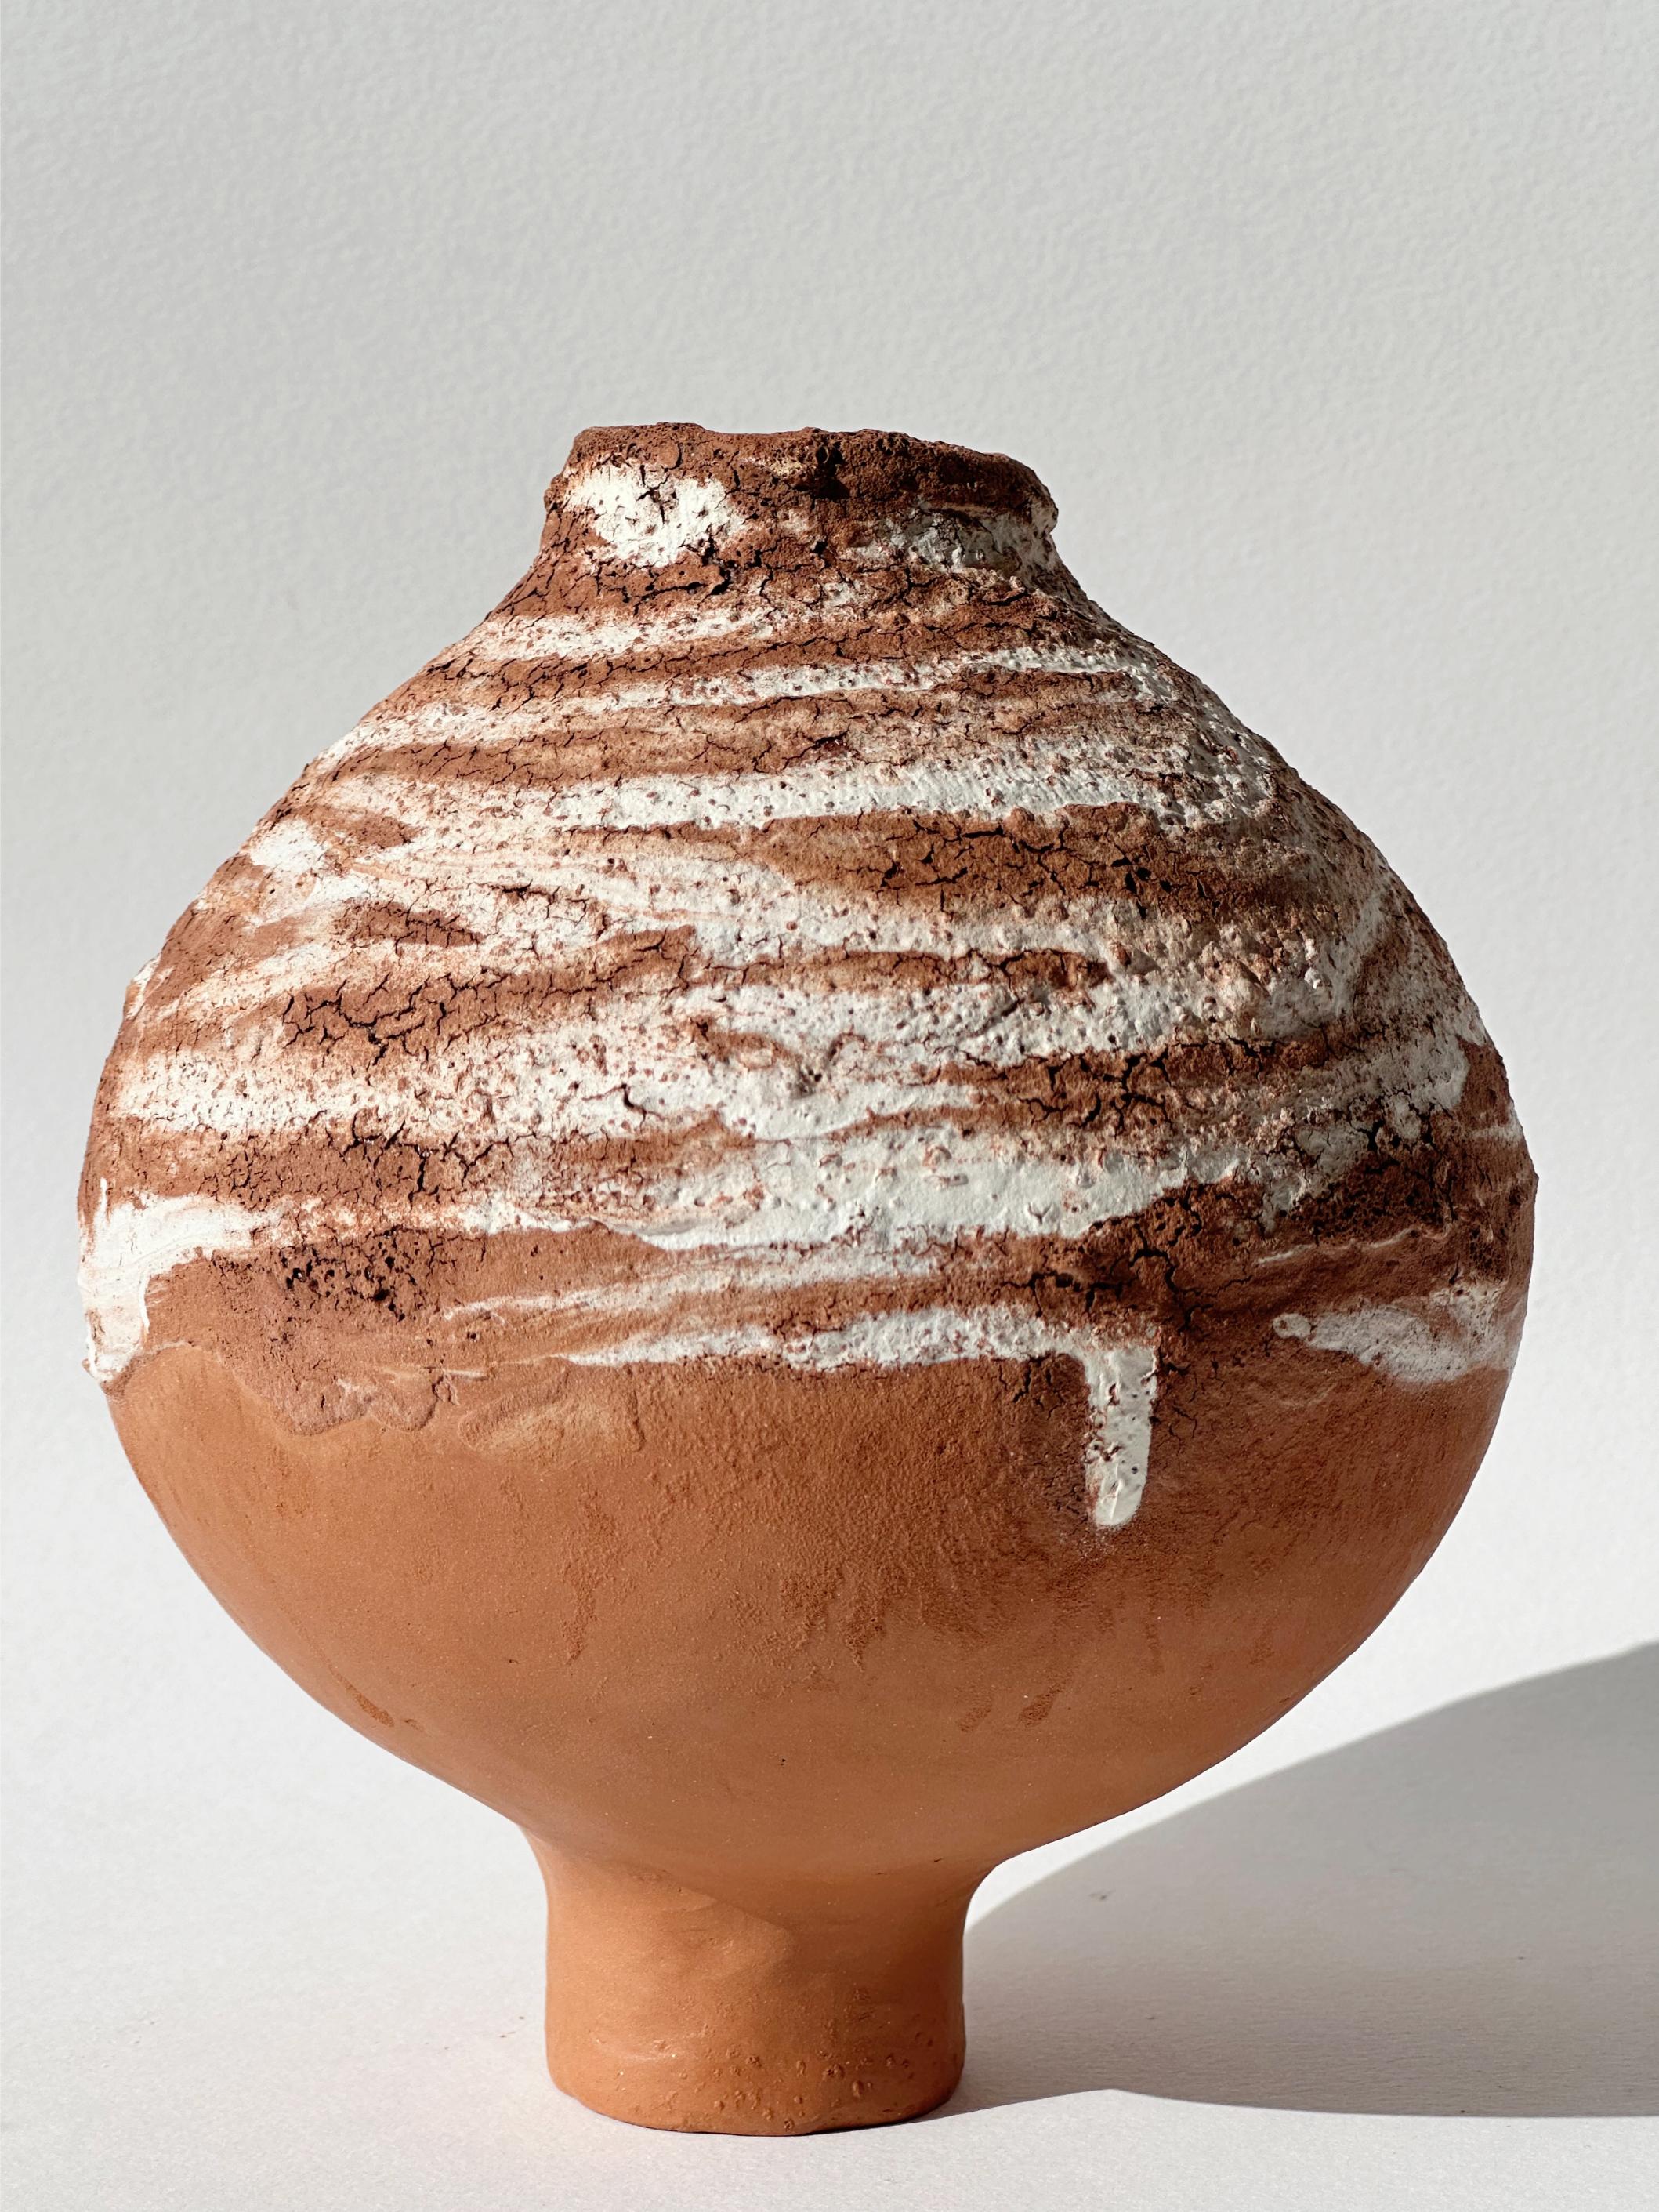 Terracotta Moon Jar No 17 by Elena Vasilantonaki
Unique
Dimensions: ⌀ 13.5 x H 16 cm (Dimensions may vary)
Materials: Local Terracotta Clay from the Island of
Crete

Growing up in Greece I was surrounded by pottery forms that have changed little